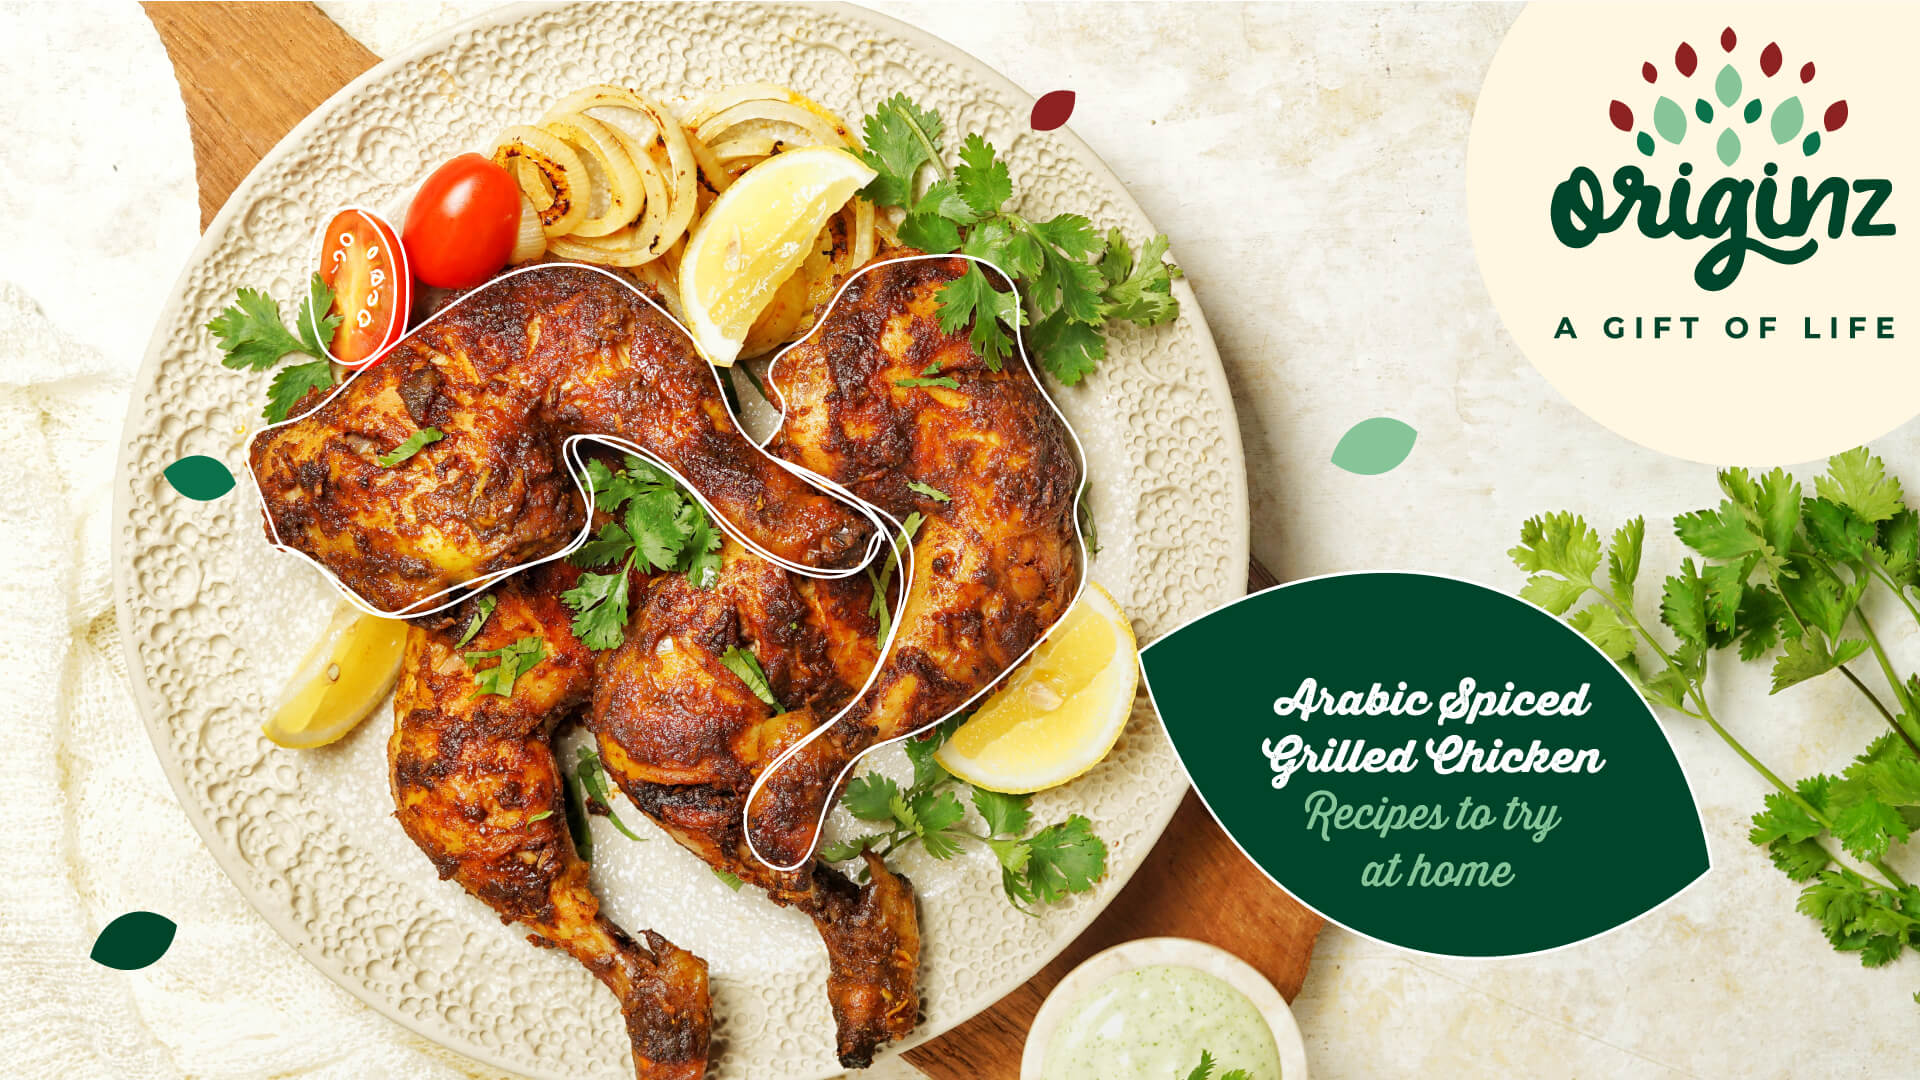 Arabic Spiced Grilled Chicken Recipes to Try at Home